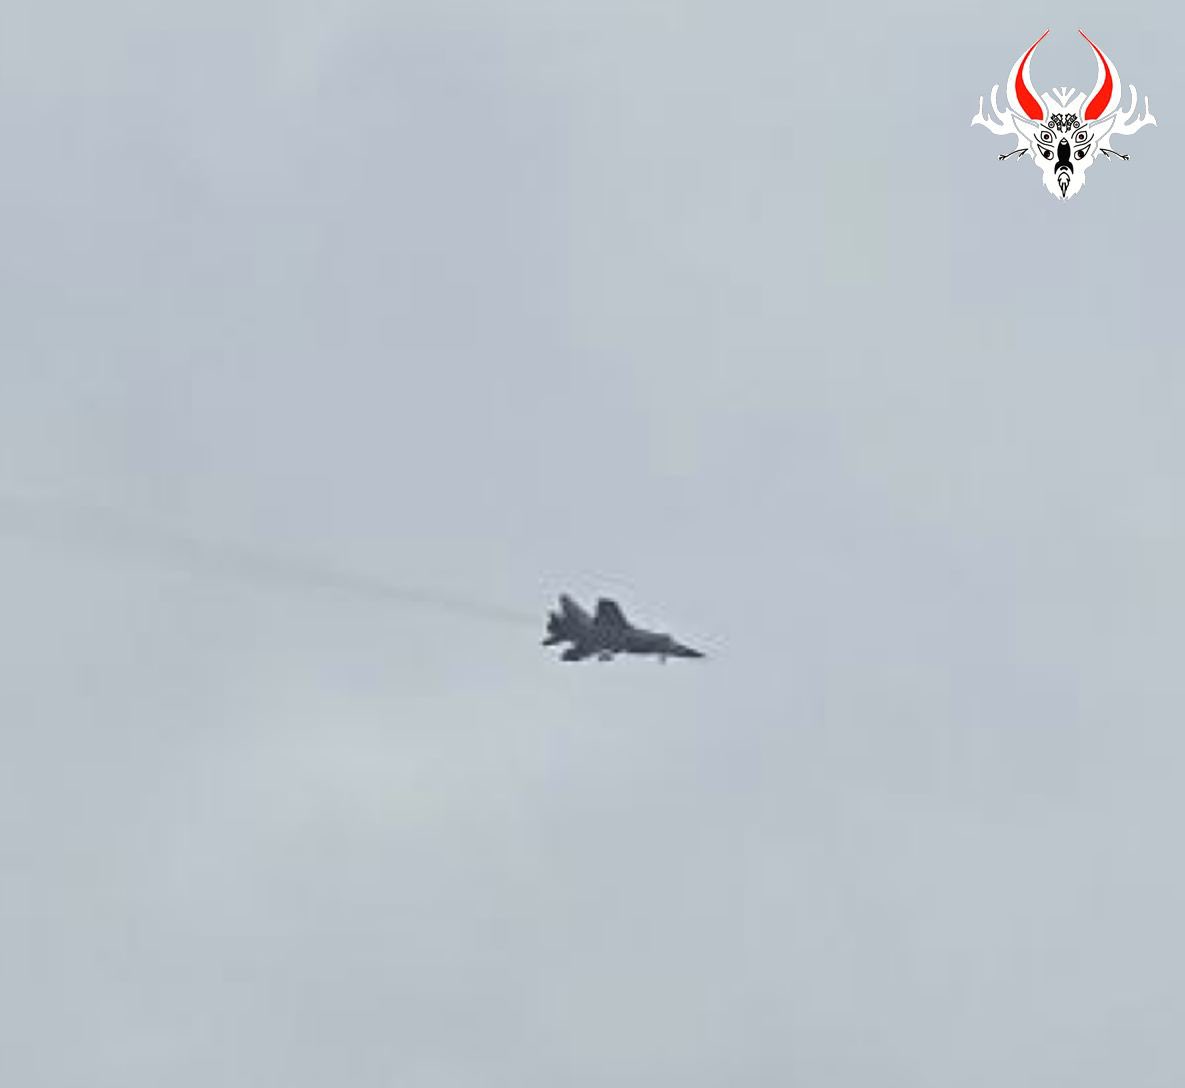 3-4 MiG-31 fighters (empty with no missiles) have been spotted over Minsk in the past 30 minutes